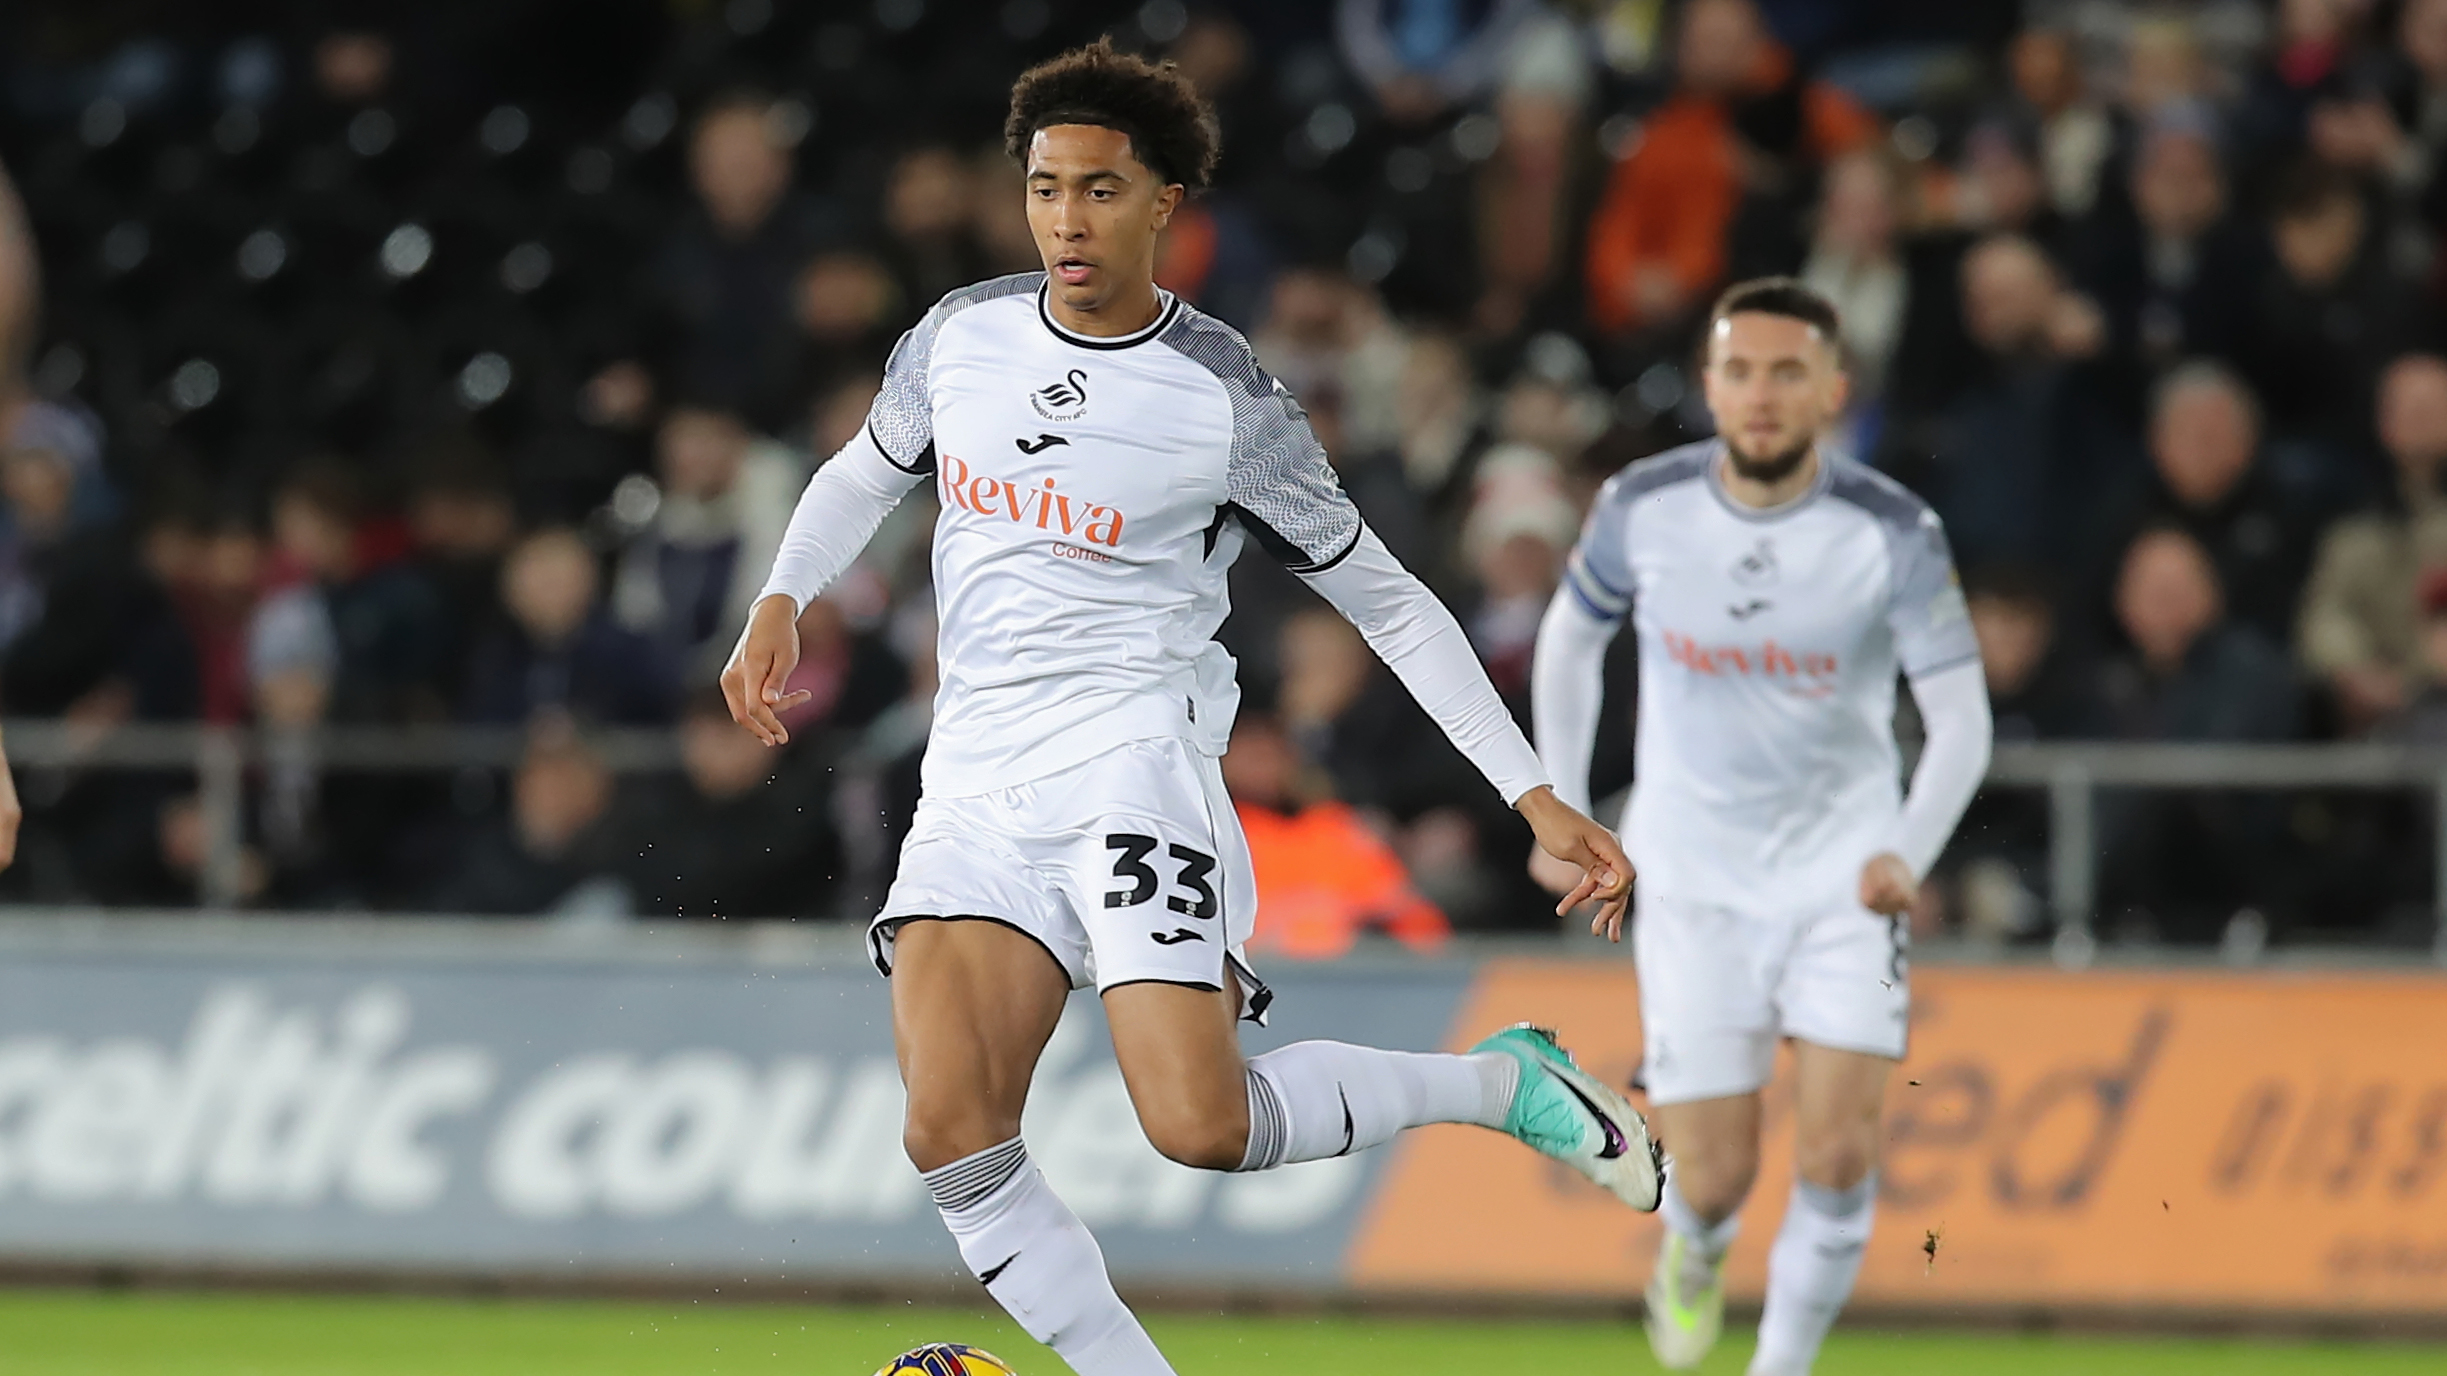 Swansea City to take cautious approach over Bashir Humphreys' availability  for Ipswich Town | Swansea